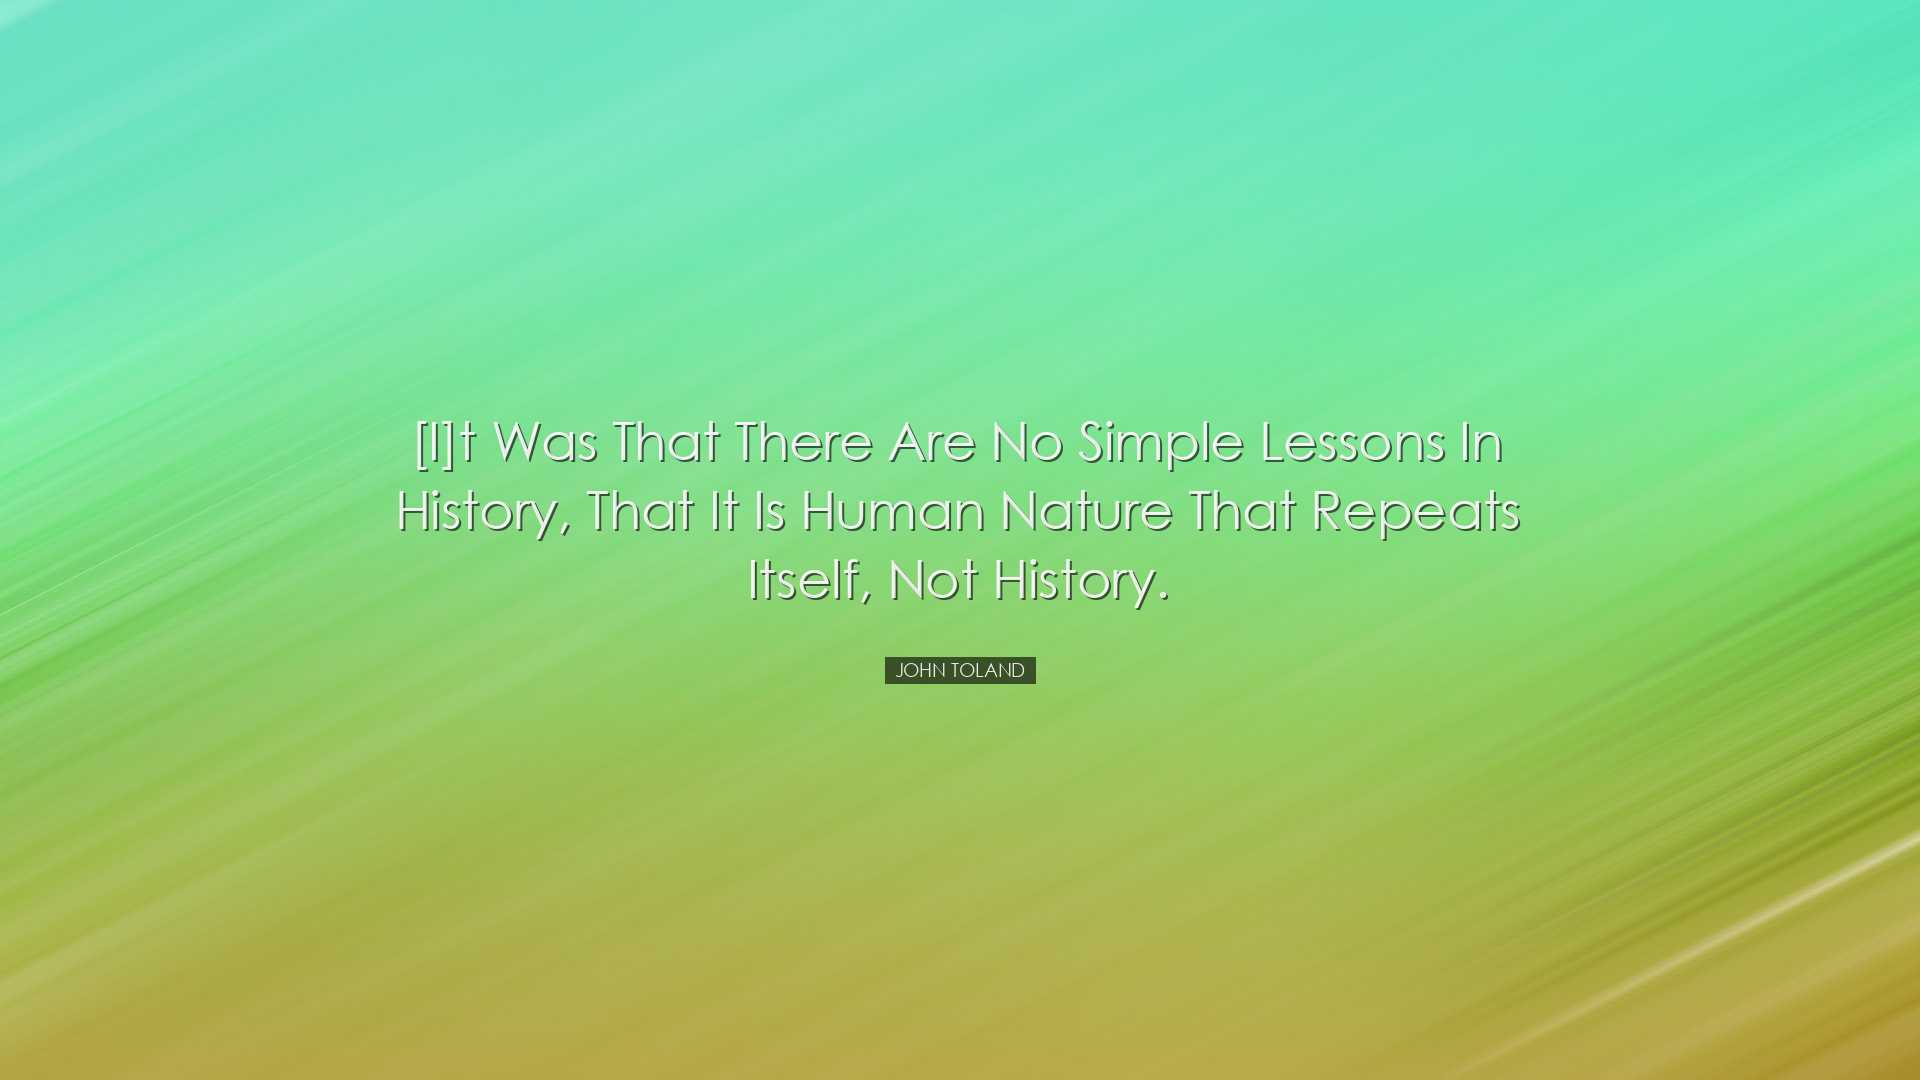 [I]t was that there are no simple lessons in history, that it is h